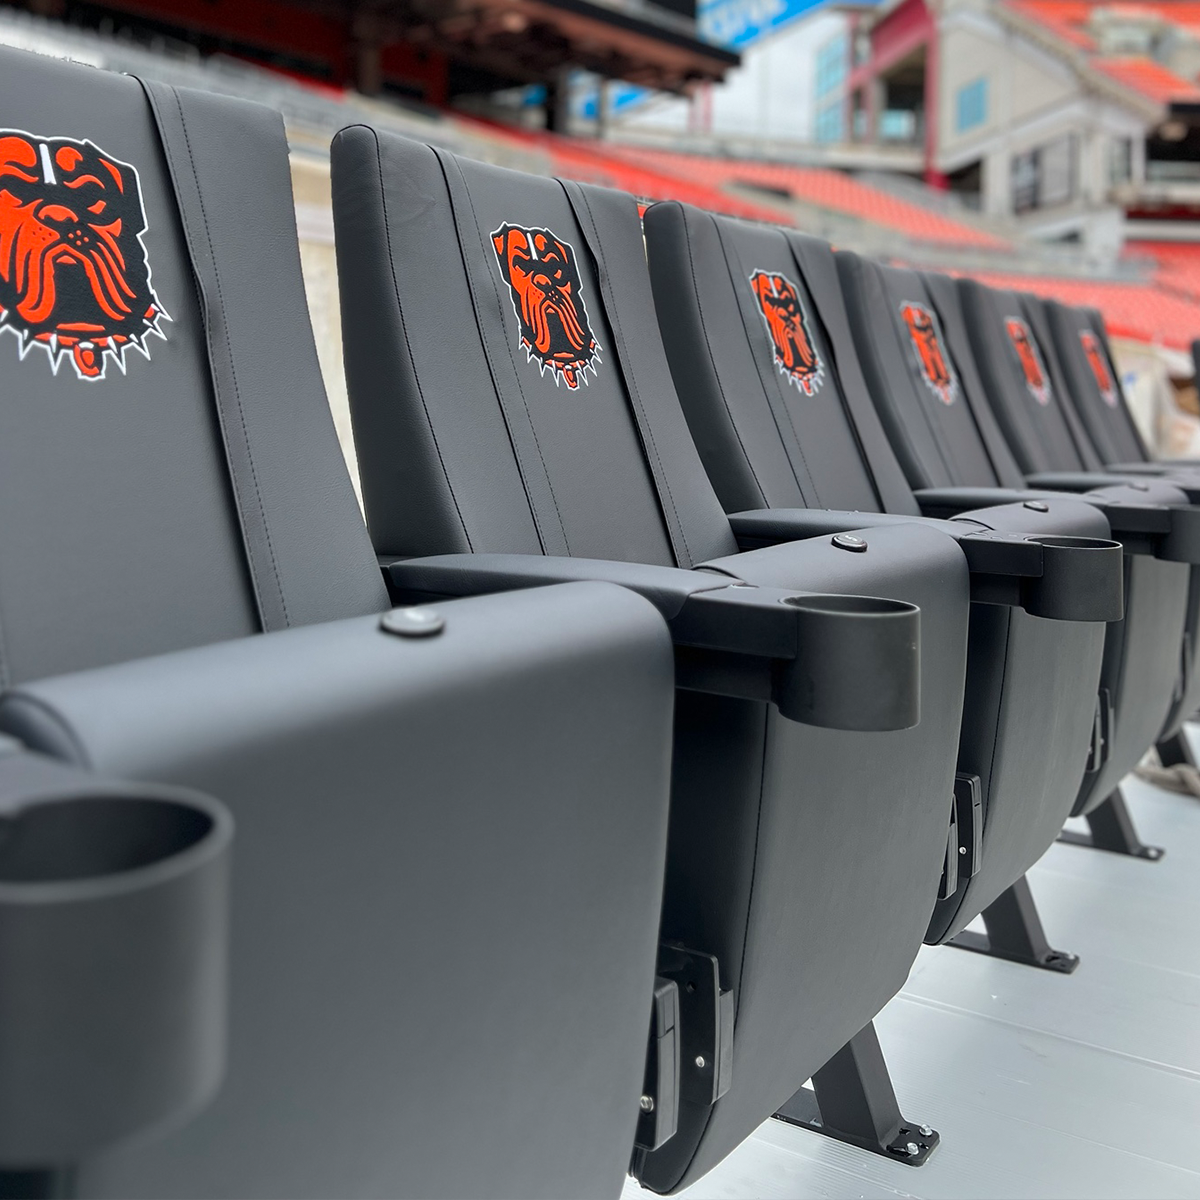 SuiteMax 3.5 VIP Seats with Alabama Crimson Tide Red A Logo